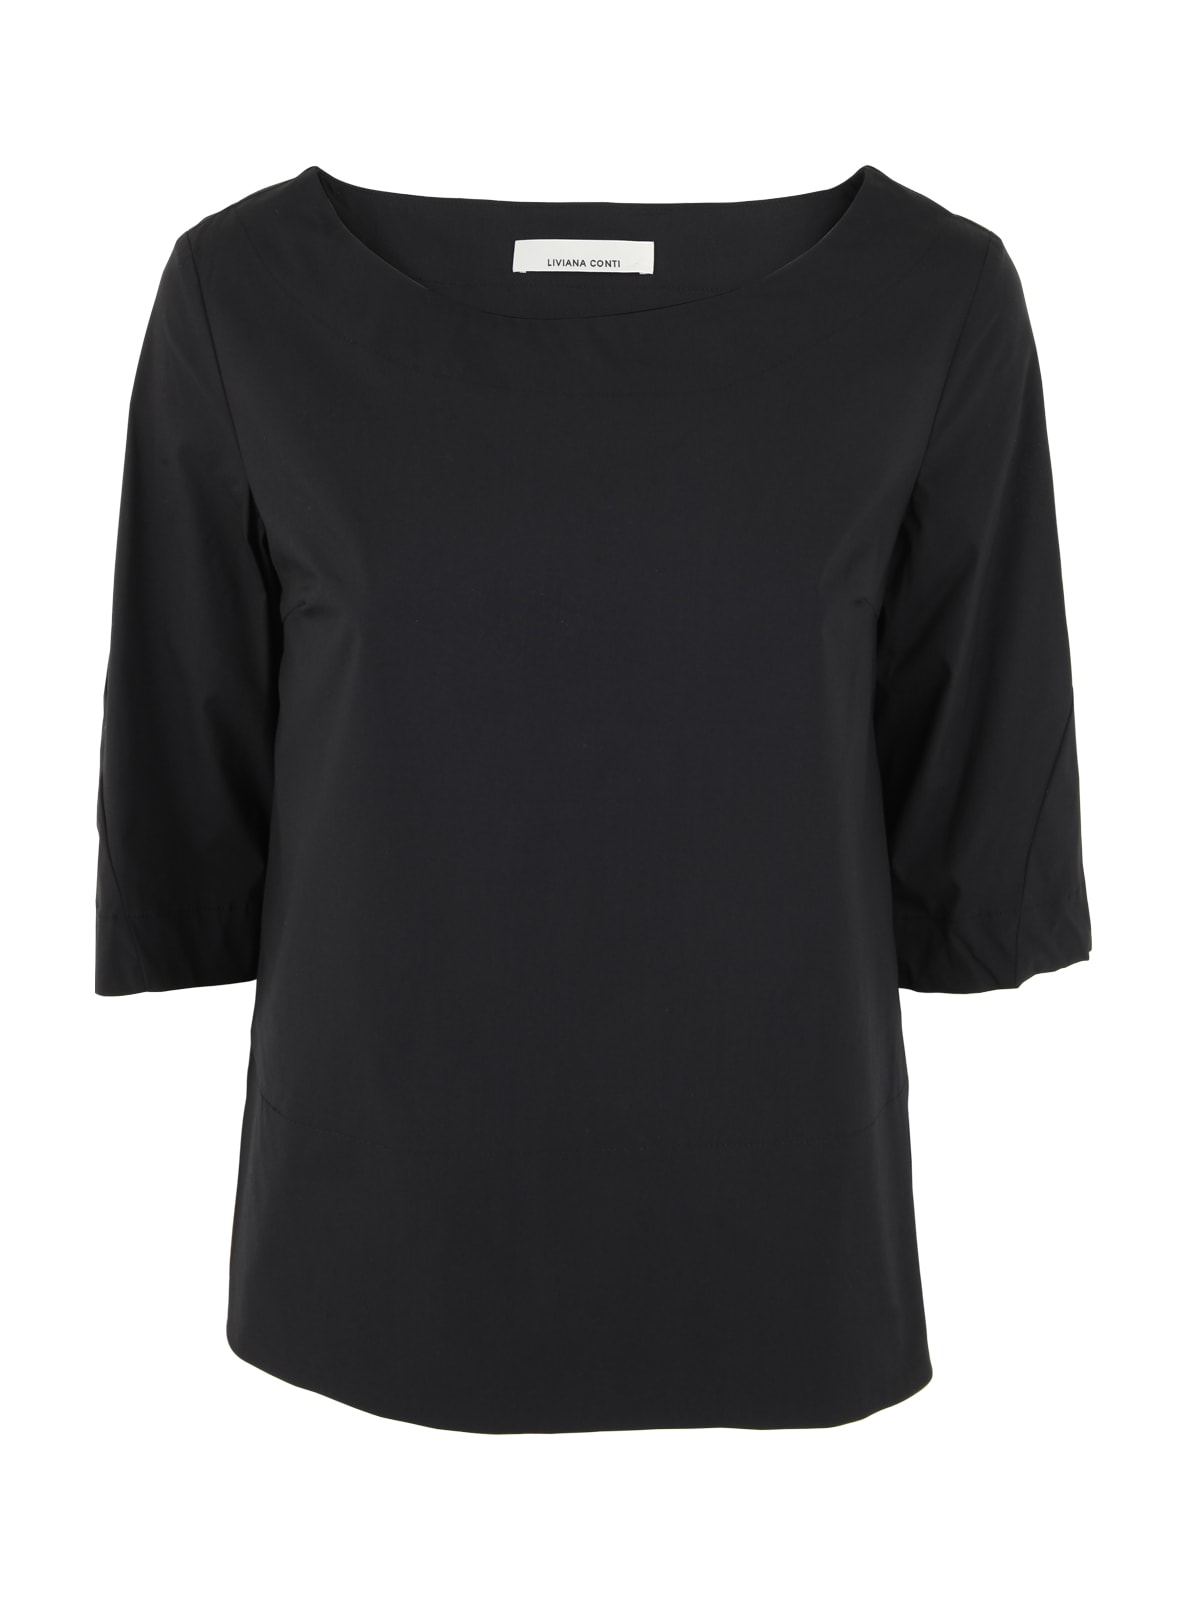 Liviana Conti Blouse With Medium Lenght Sleeves